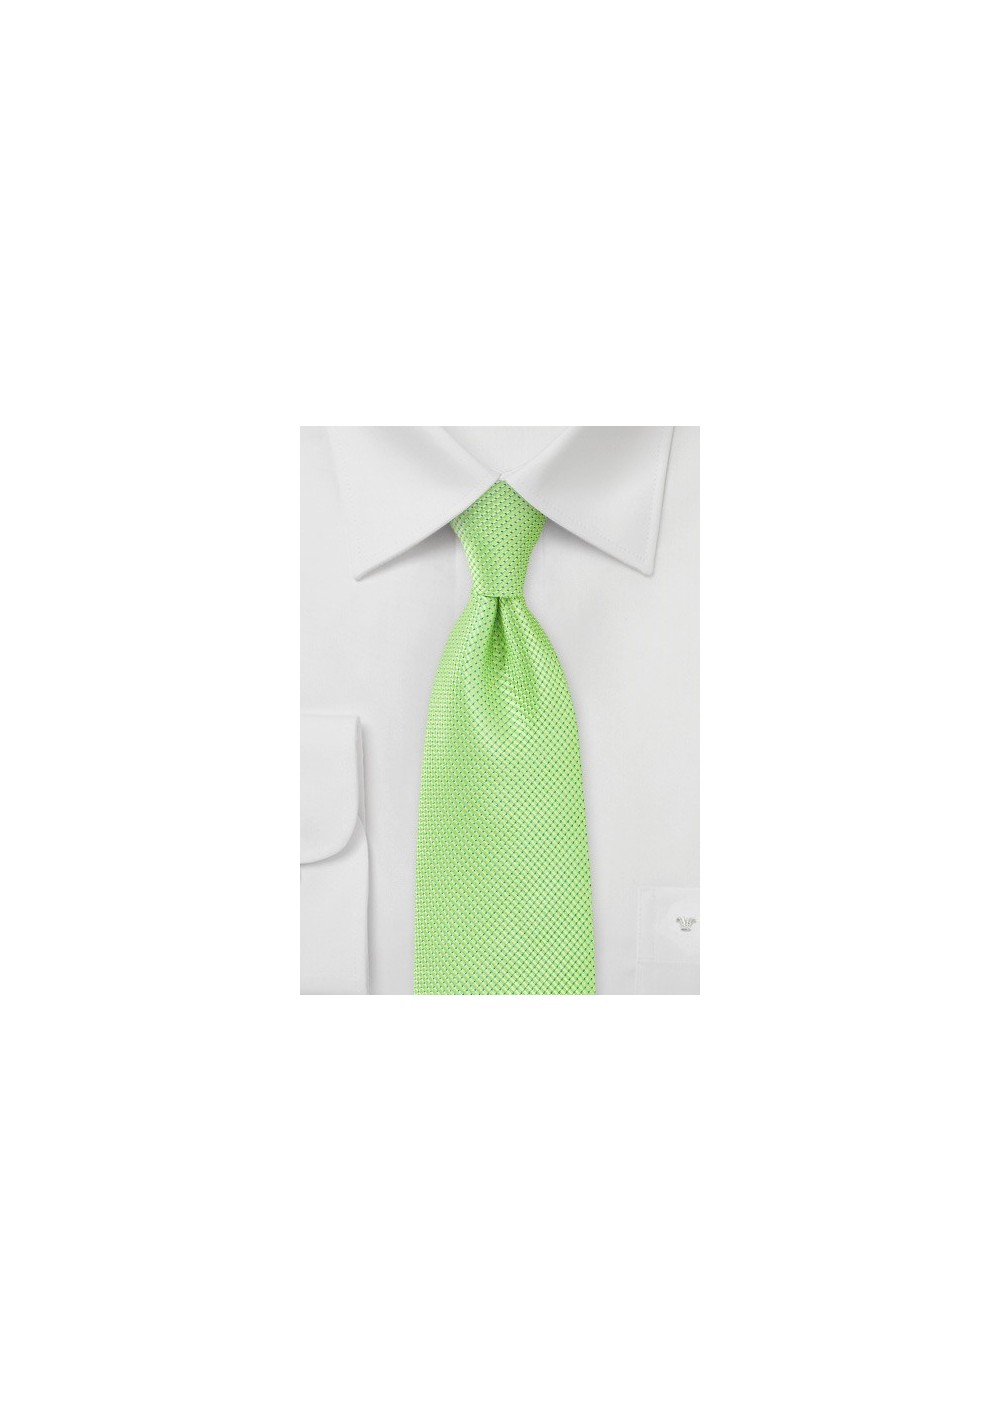 Bold Key-Lime Green Tie in Long Length